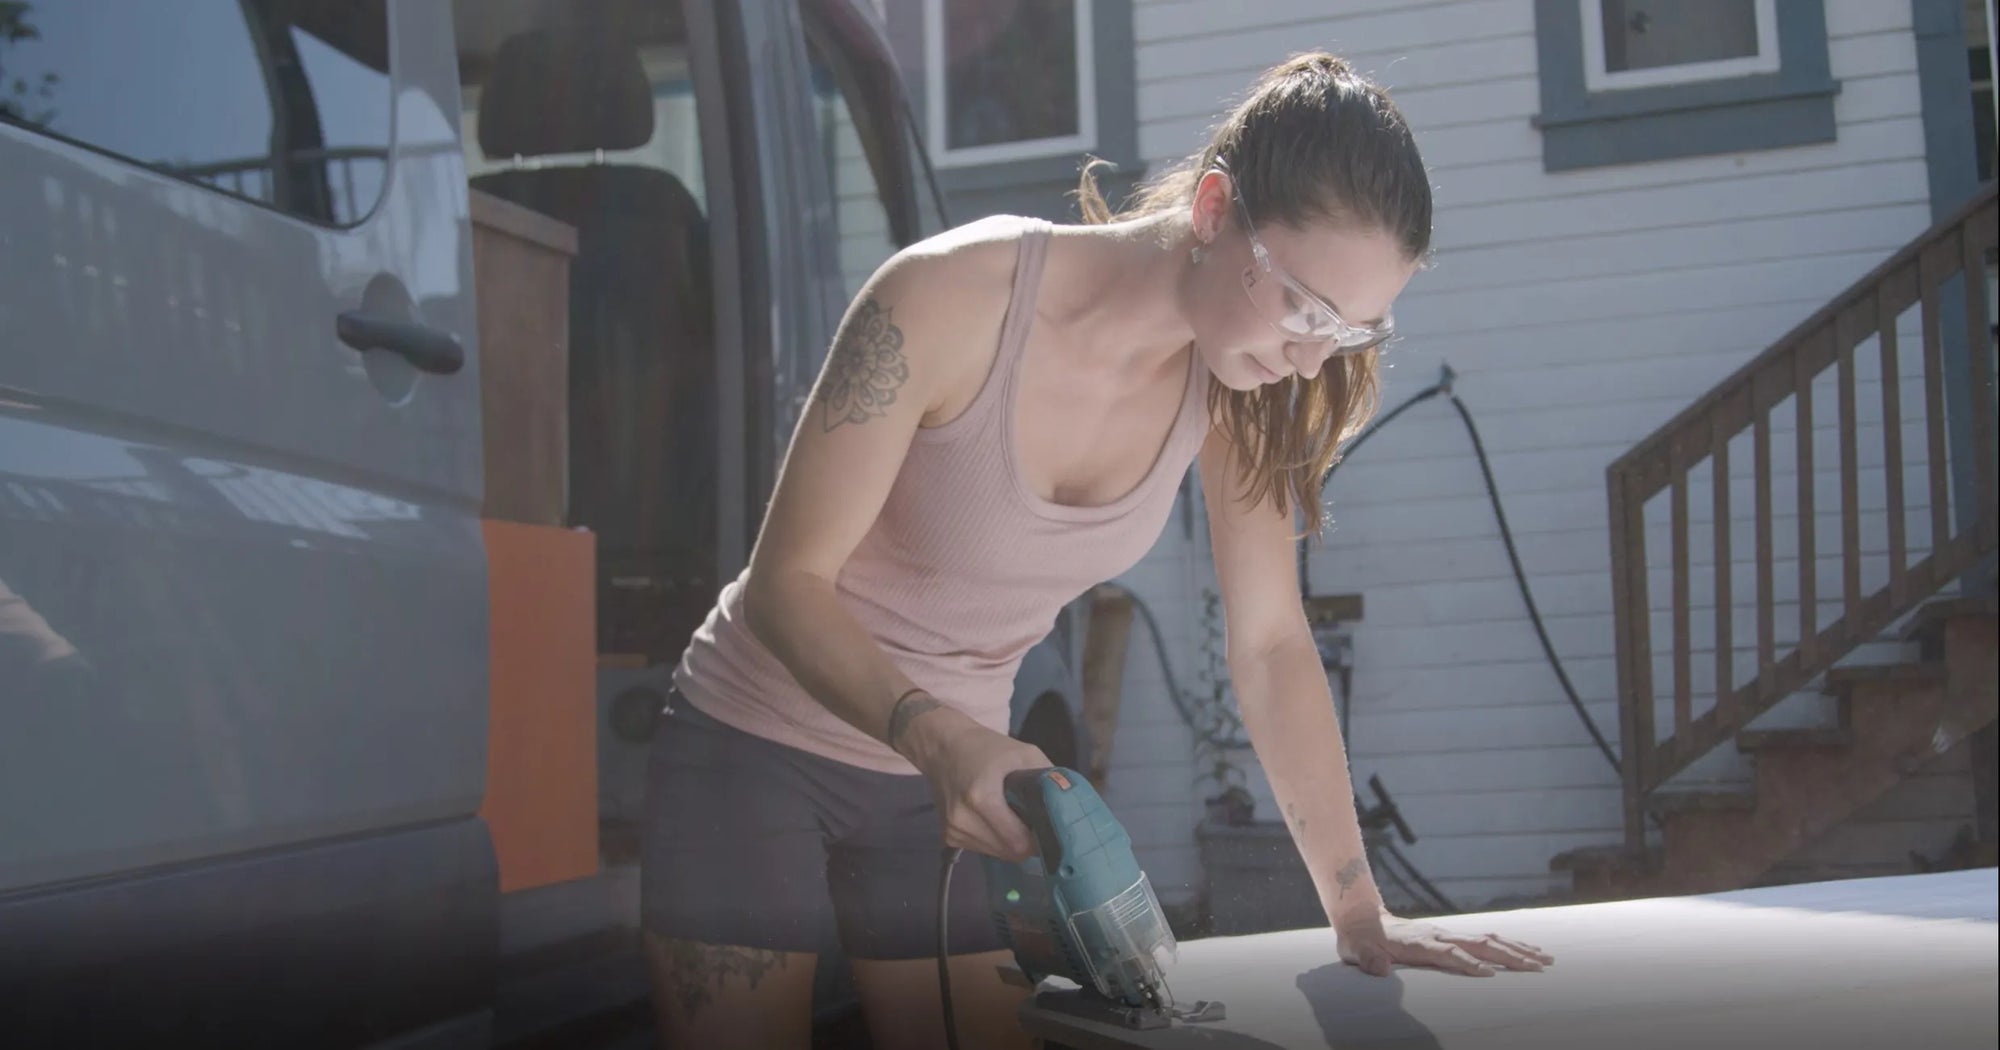 Woman cutting headliner shelf using vancillary template wearing rose tank top to be installed in a sprinter camper conversion van